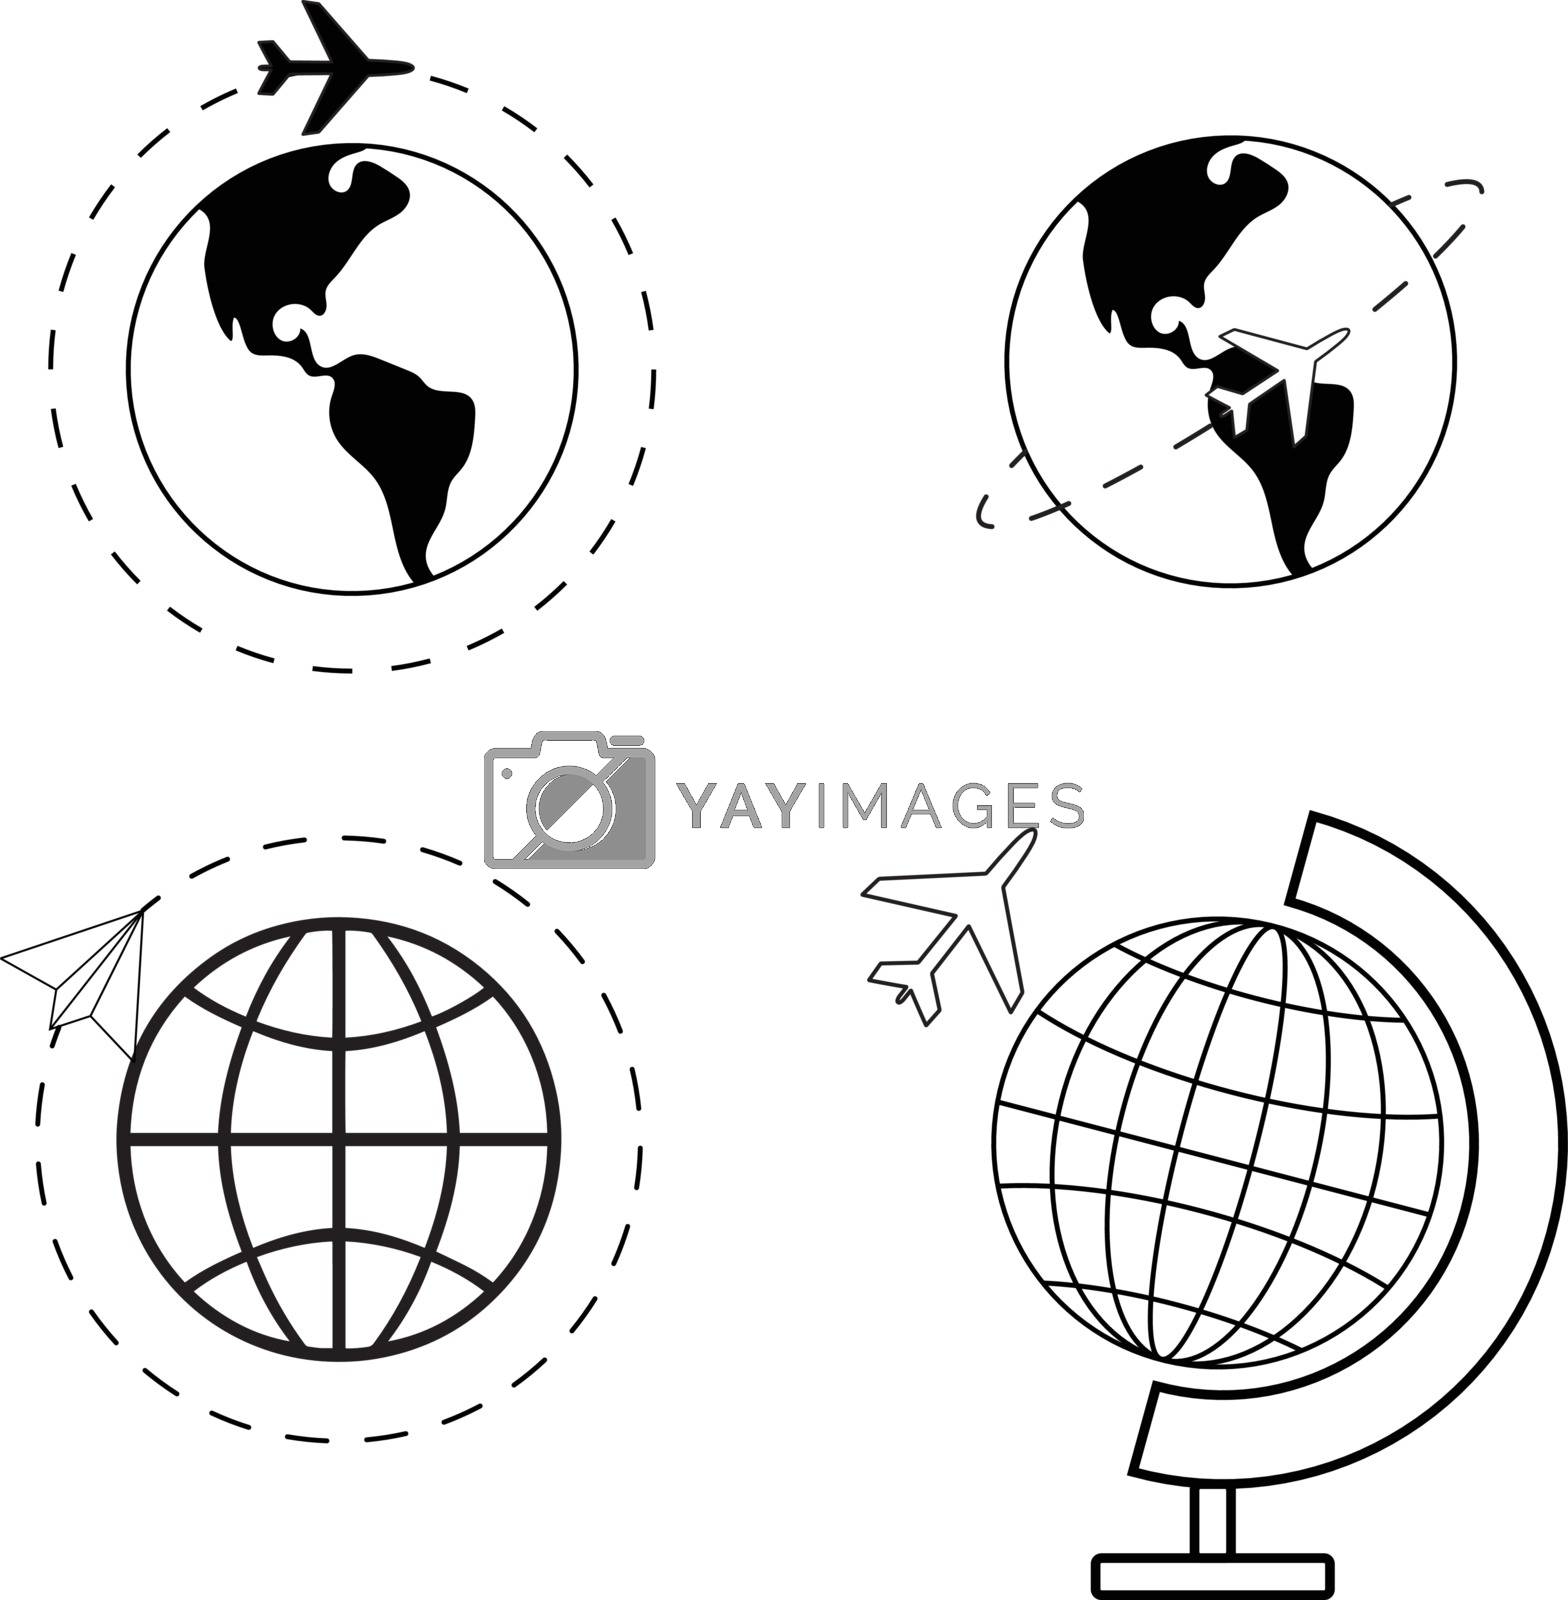 Royalty free image of Airplane flying around world image pack, vector illustration by cuckoo_111